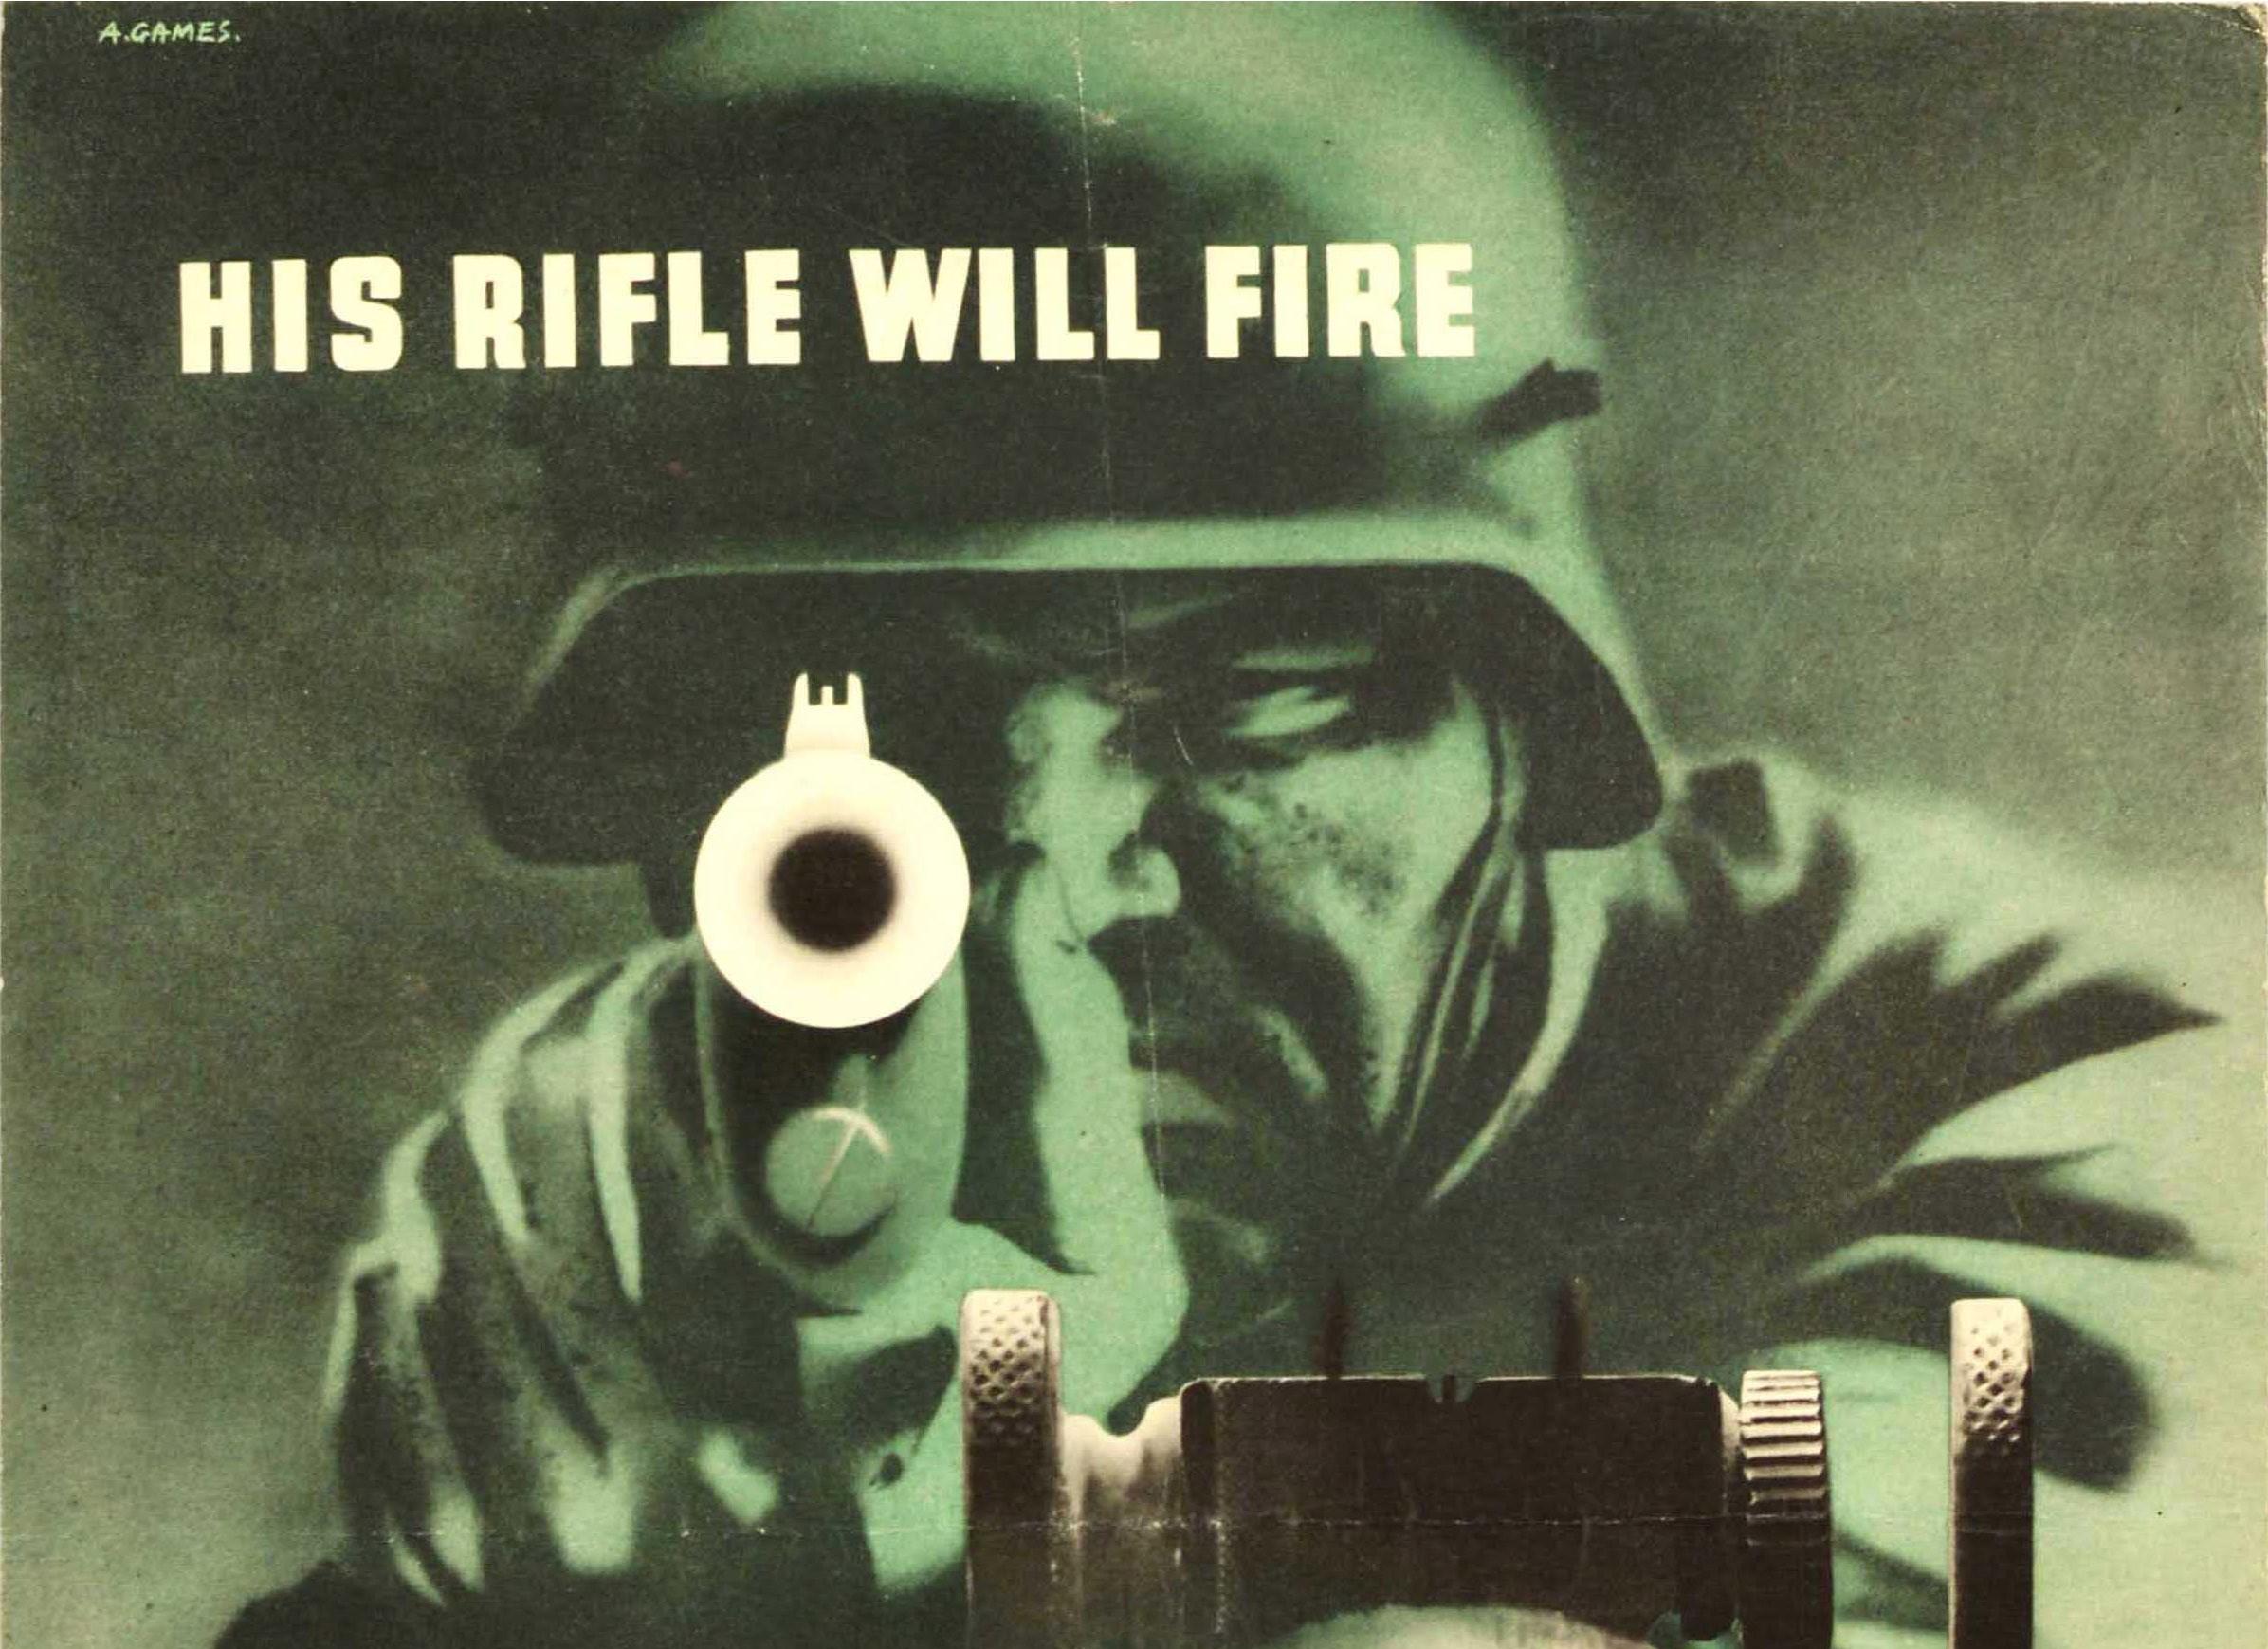 Original vintage World War Two military safety poster - His rifle will fire Will mine? Care of arms is care of life - featuring a dynamic design by the notable British graphic designer Abram Games (Abraham Gamse; 1914-1996) depicting a soldier